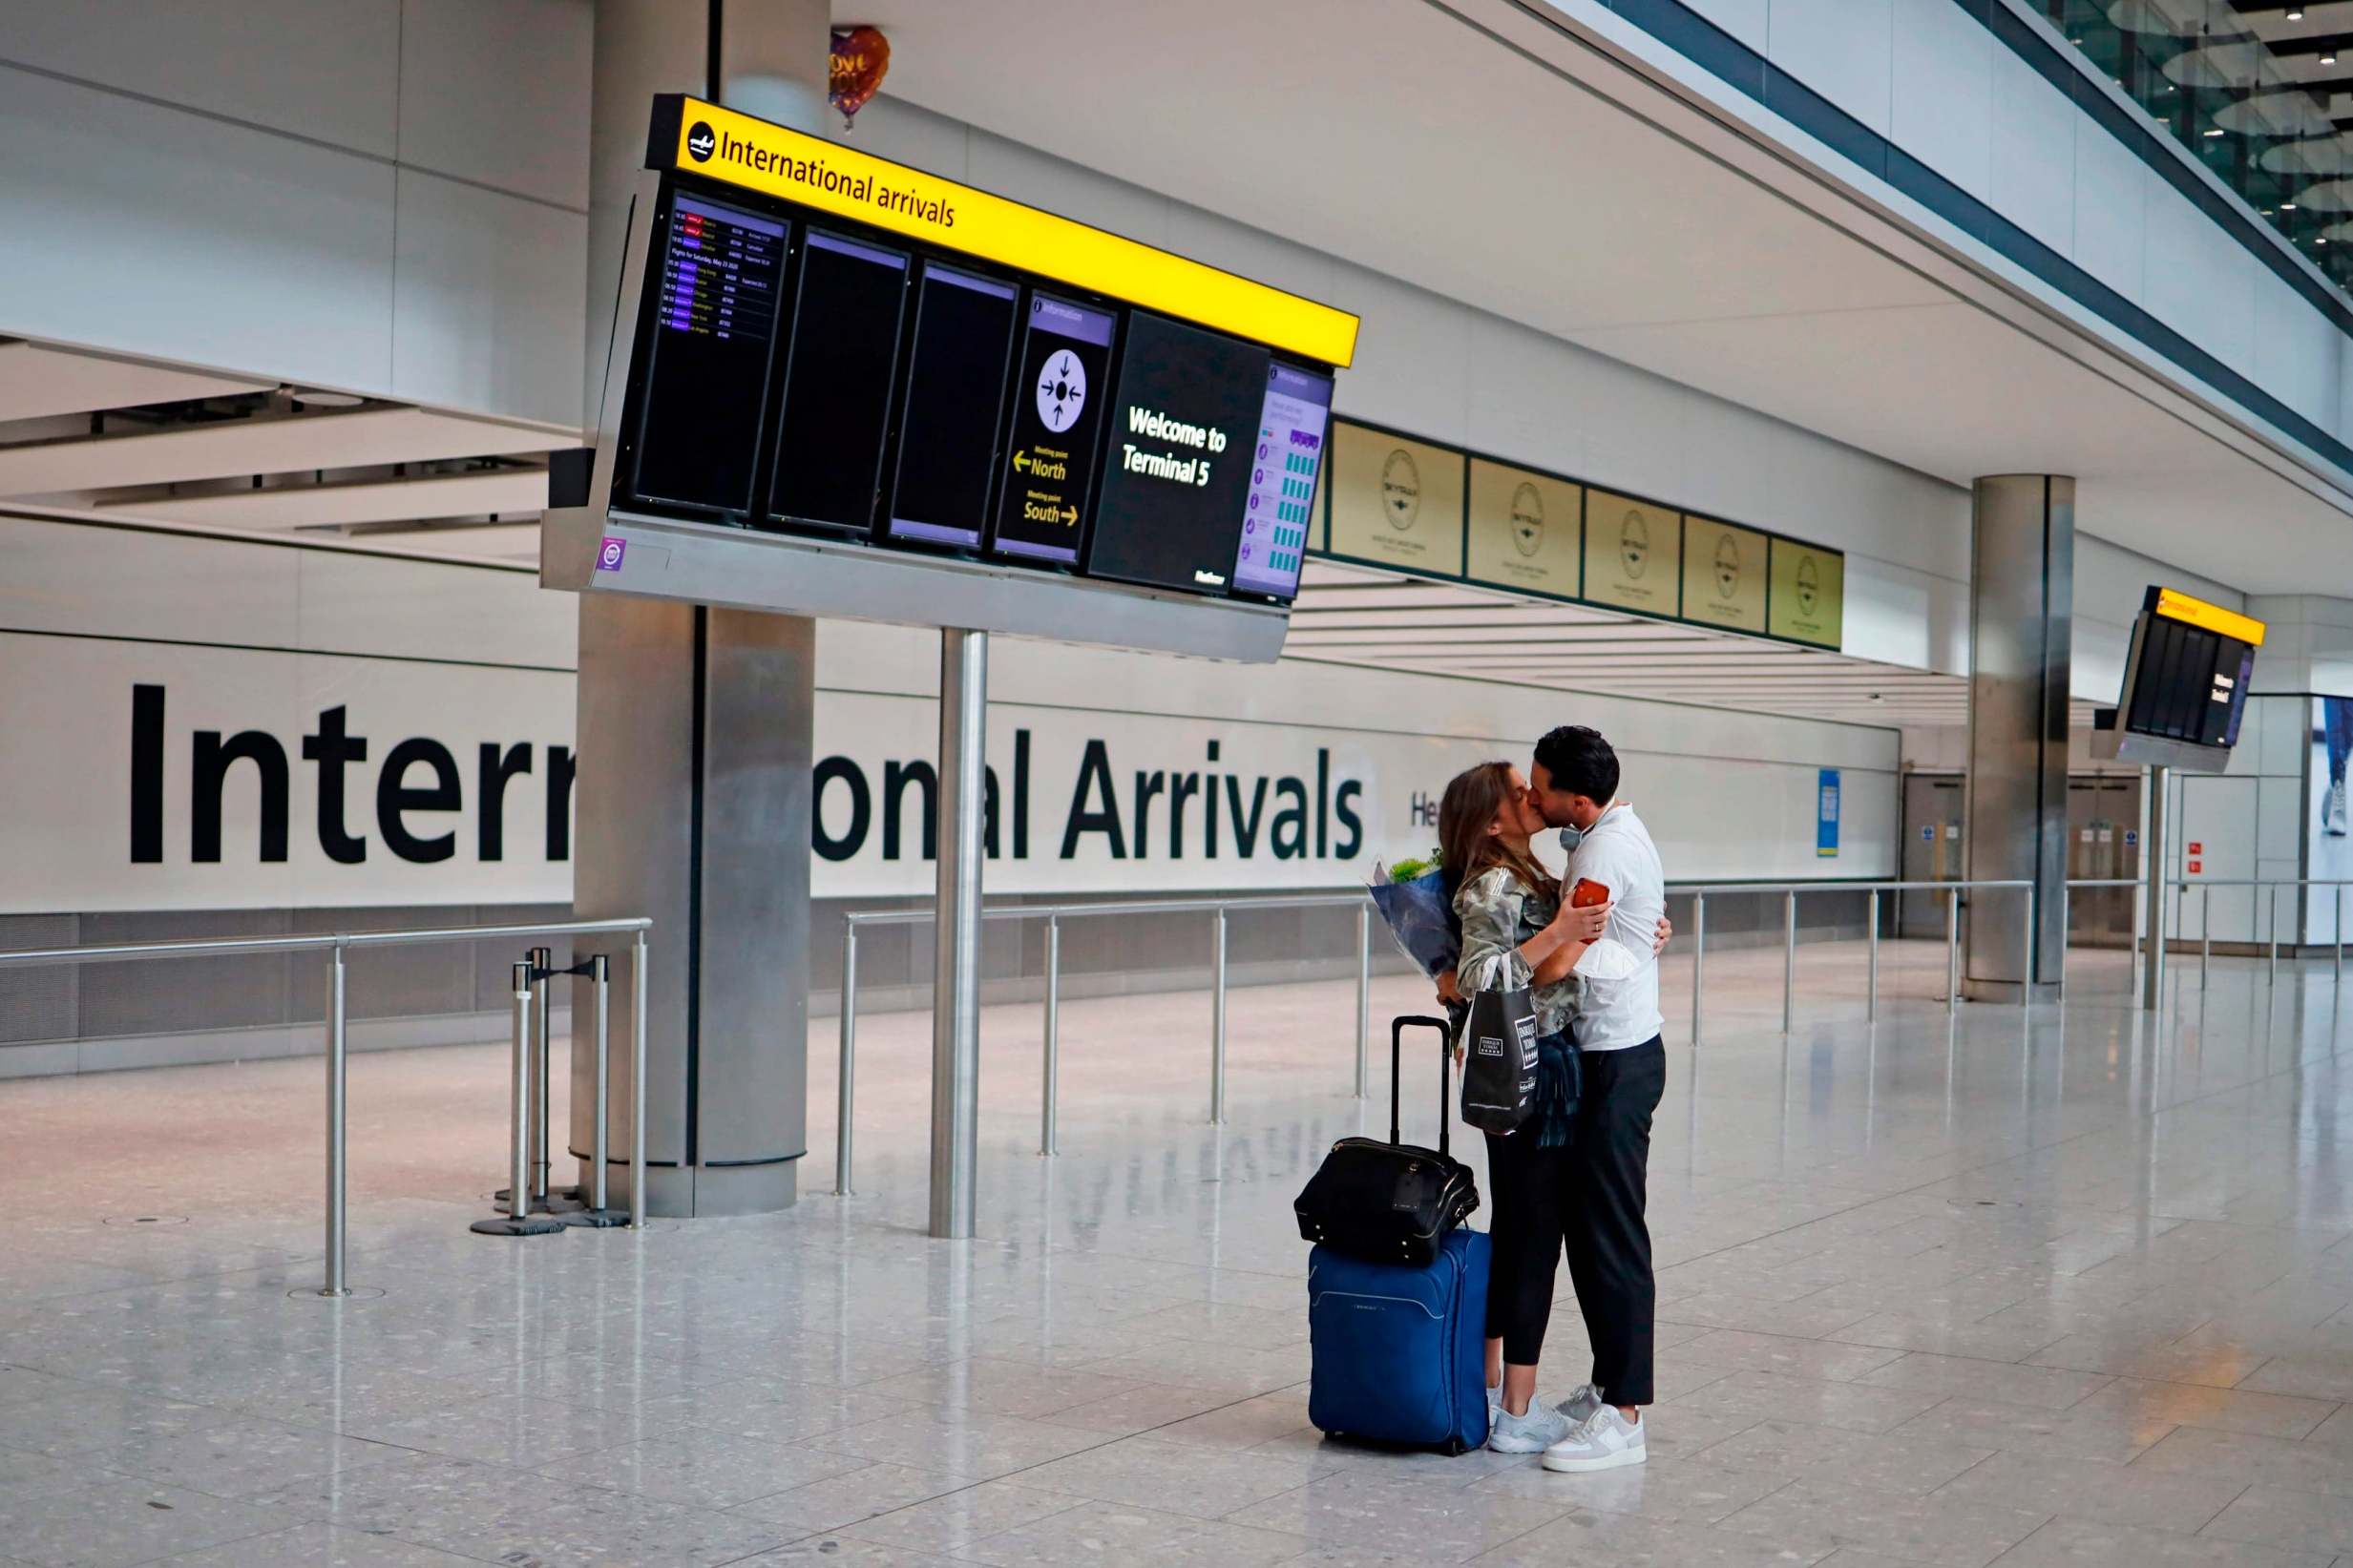 More than 2 million British travellers able to avoid 14-day quarantine after travelling abroad